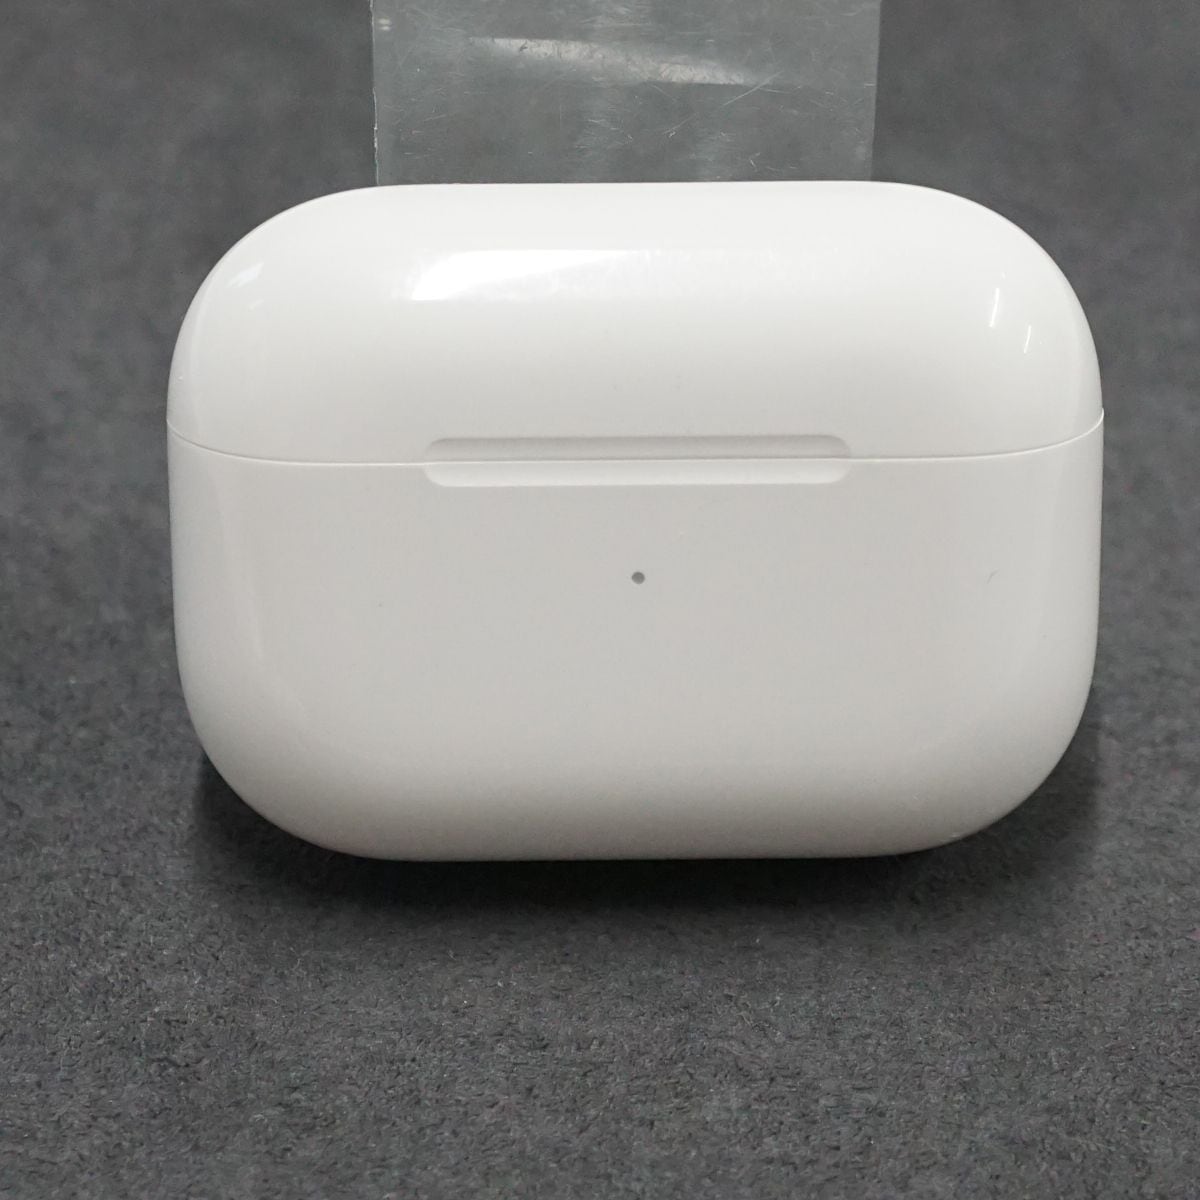 Apple AirPodsプロ　MWP22J/A 正規品